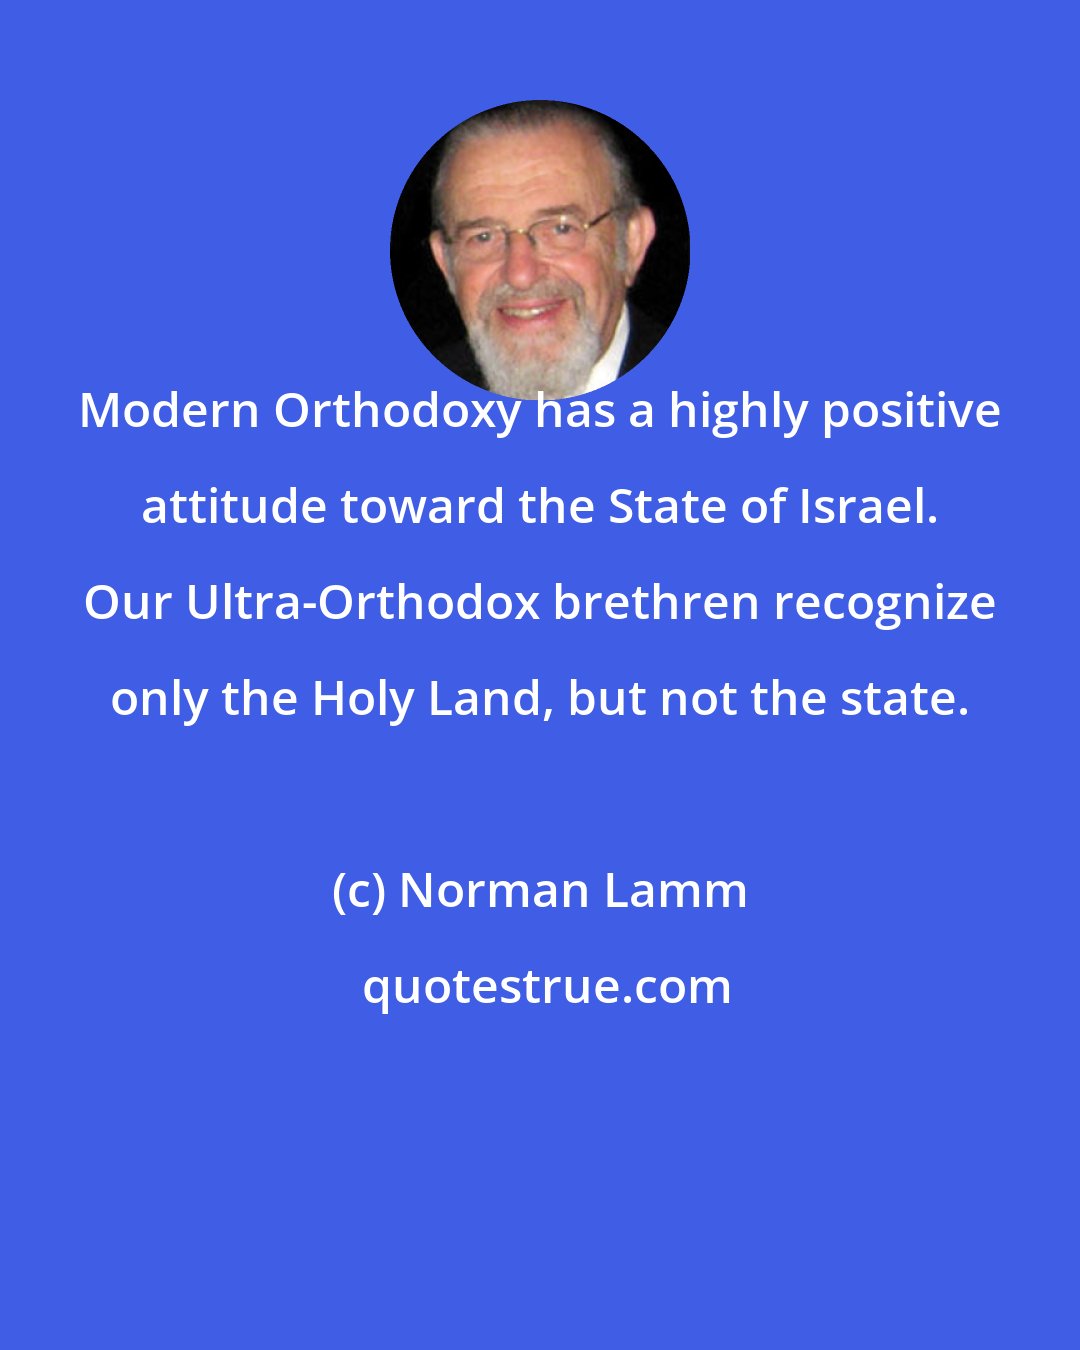 Norman Lamm: Modern Orthodoxy has a highly positive attitude toward the State of Israel. Our Ultra-Orthodox brethren recognize only the Holy Land, but not the state.